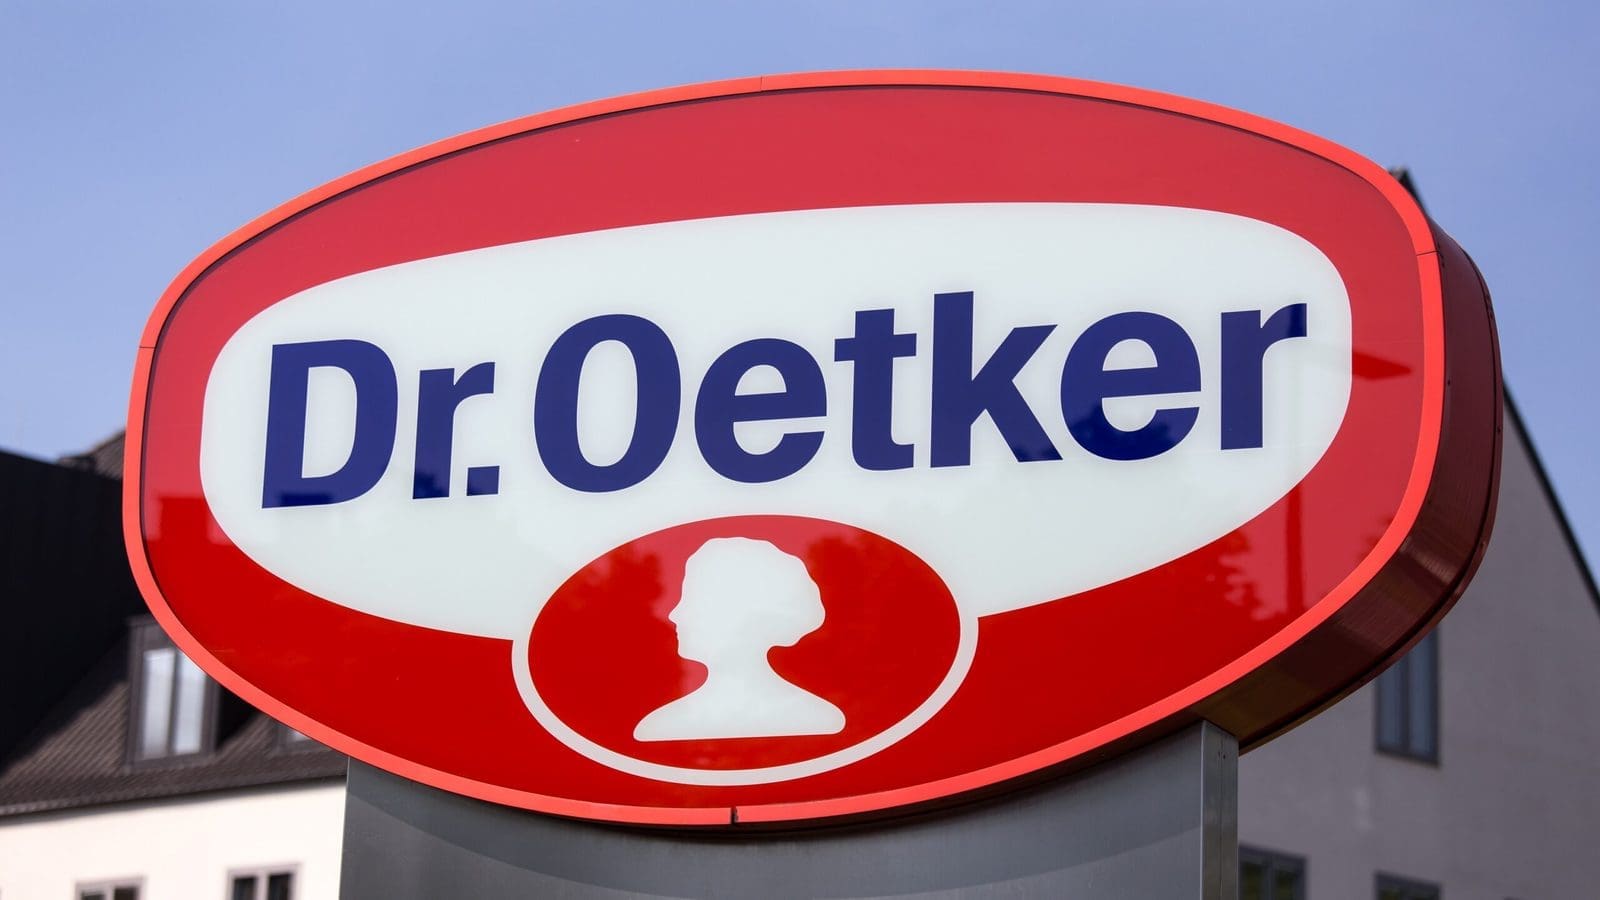 German food processor Dr. Oetker has snapped up Imperial in a move to expand its portfolio in Belgium